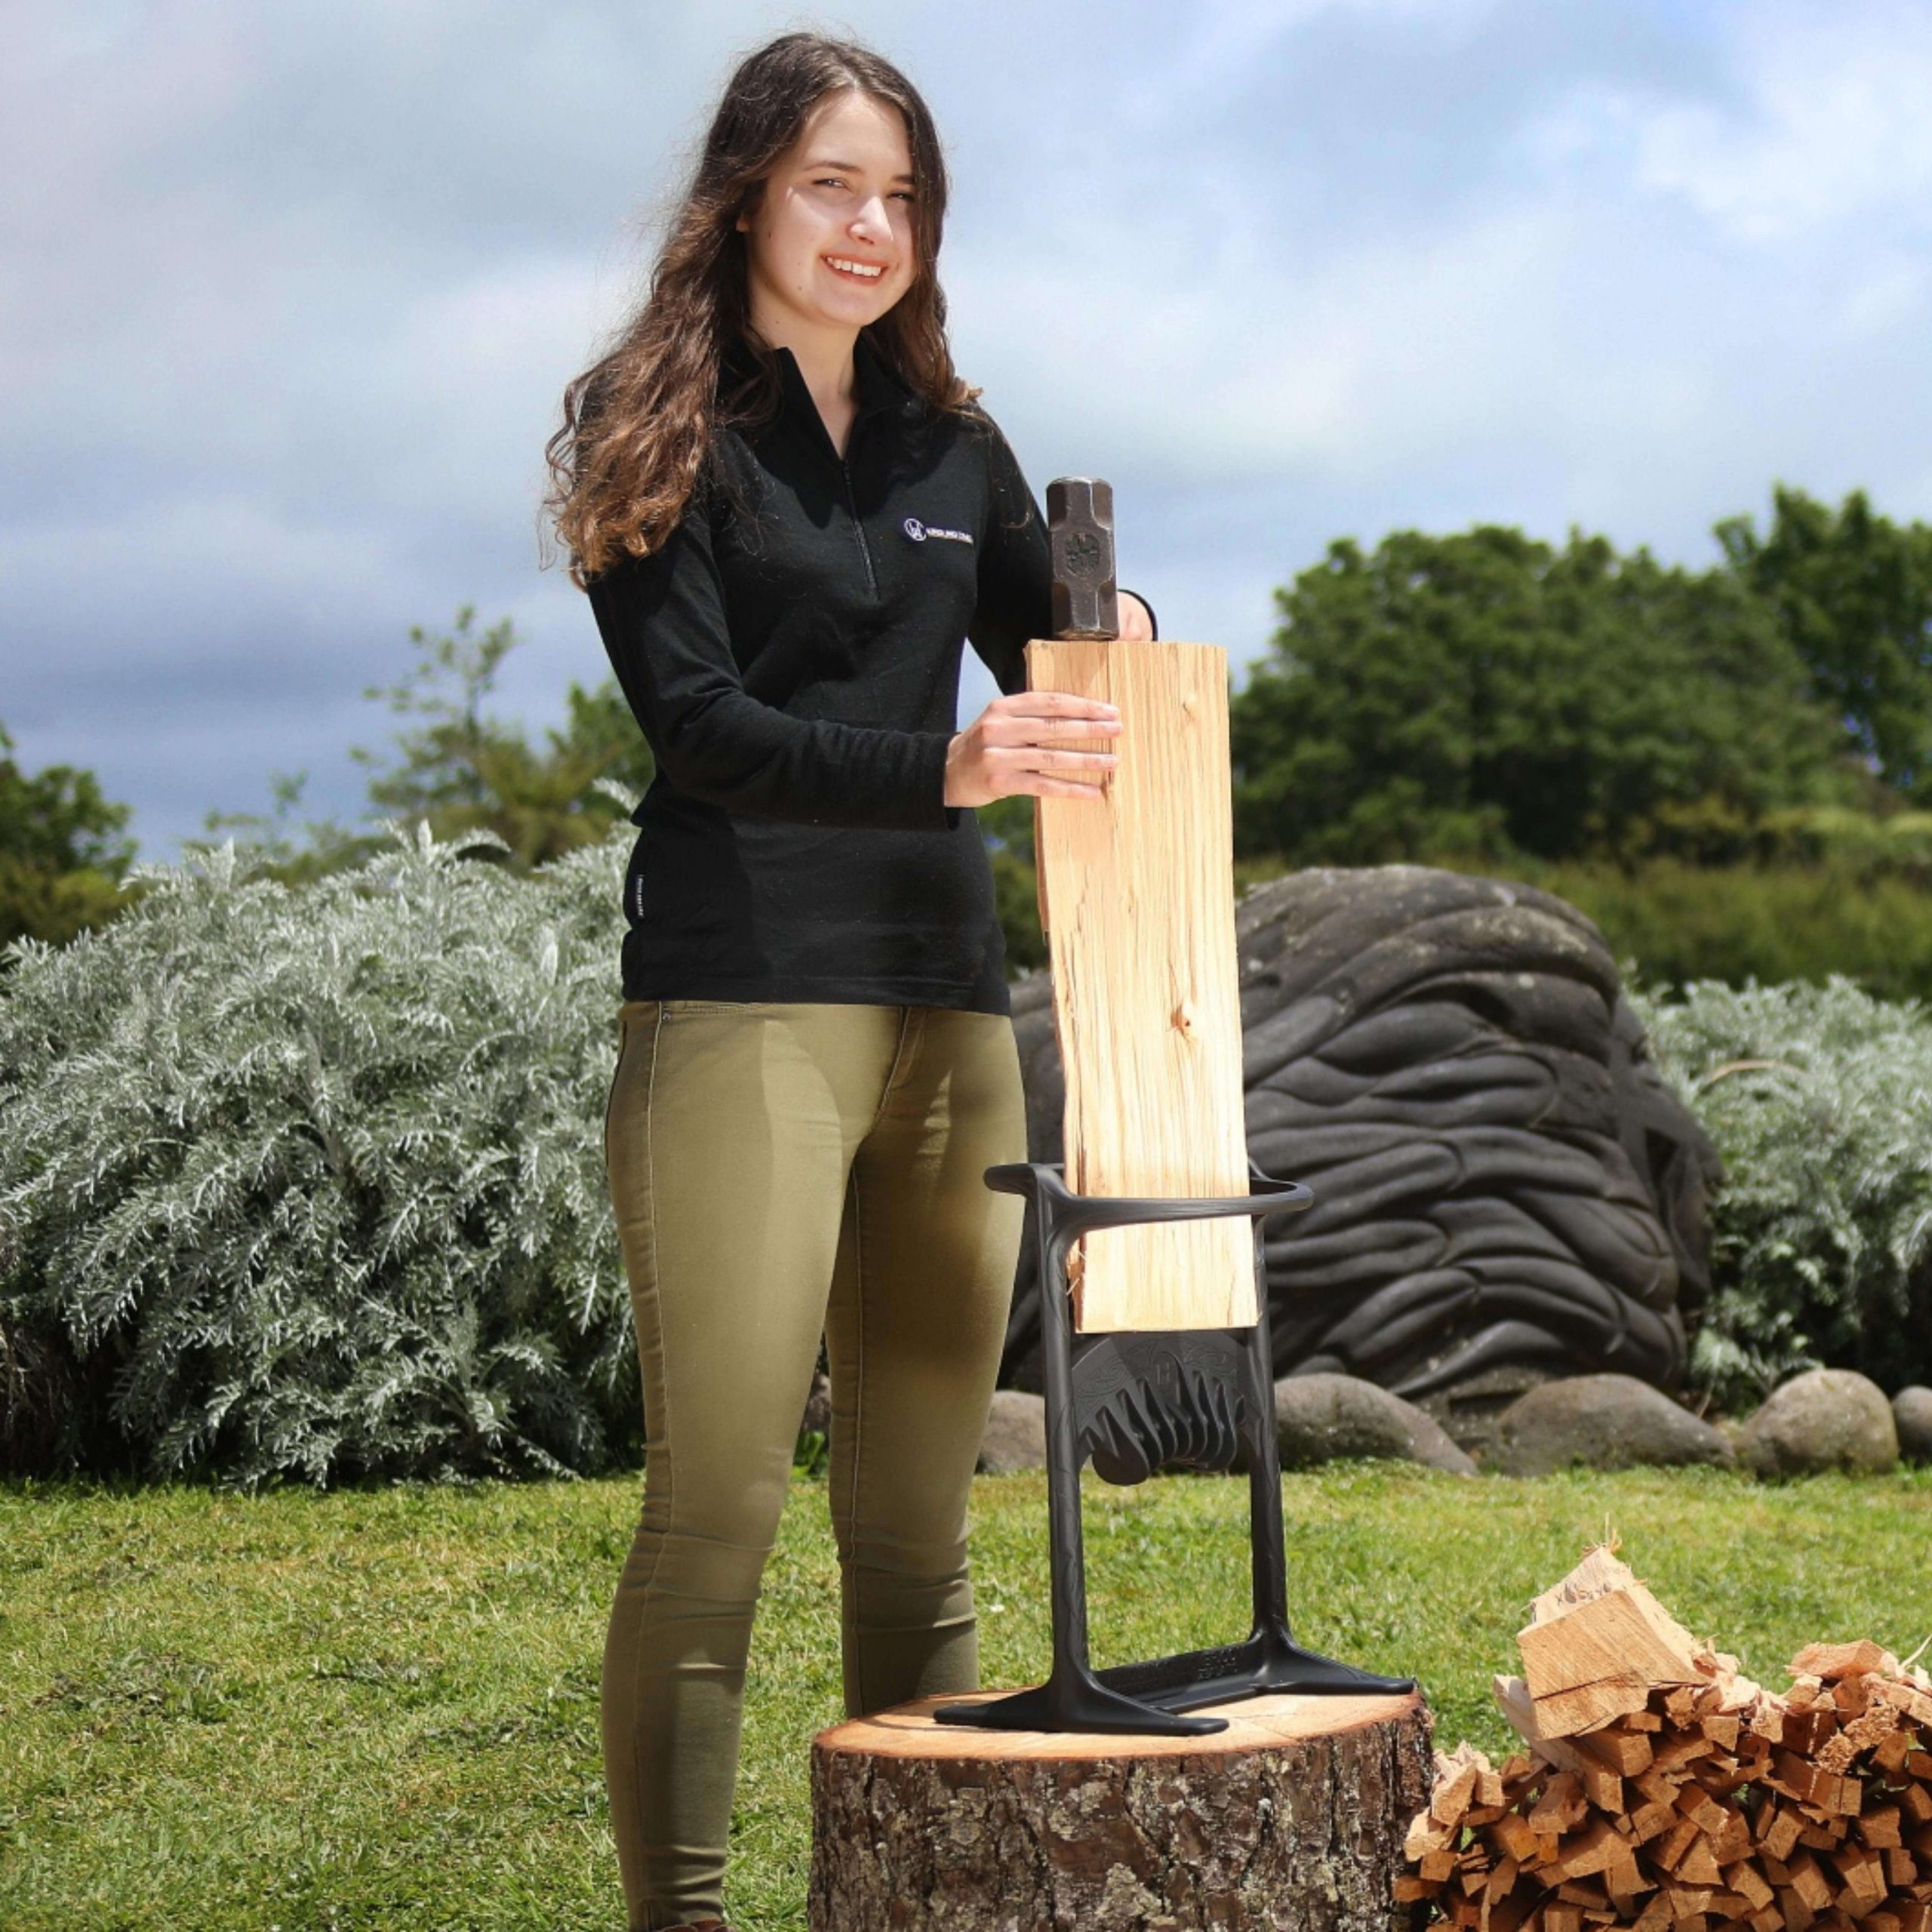 Ayla Hutchinson using her invention, the kindling cracker to split firewood on a chopping block